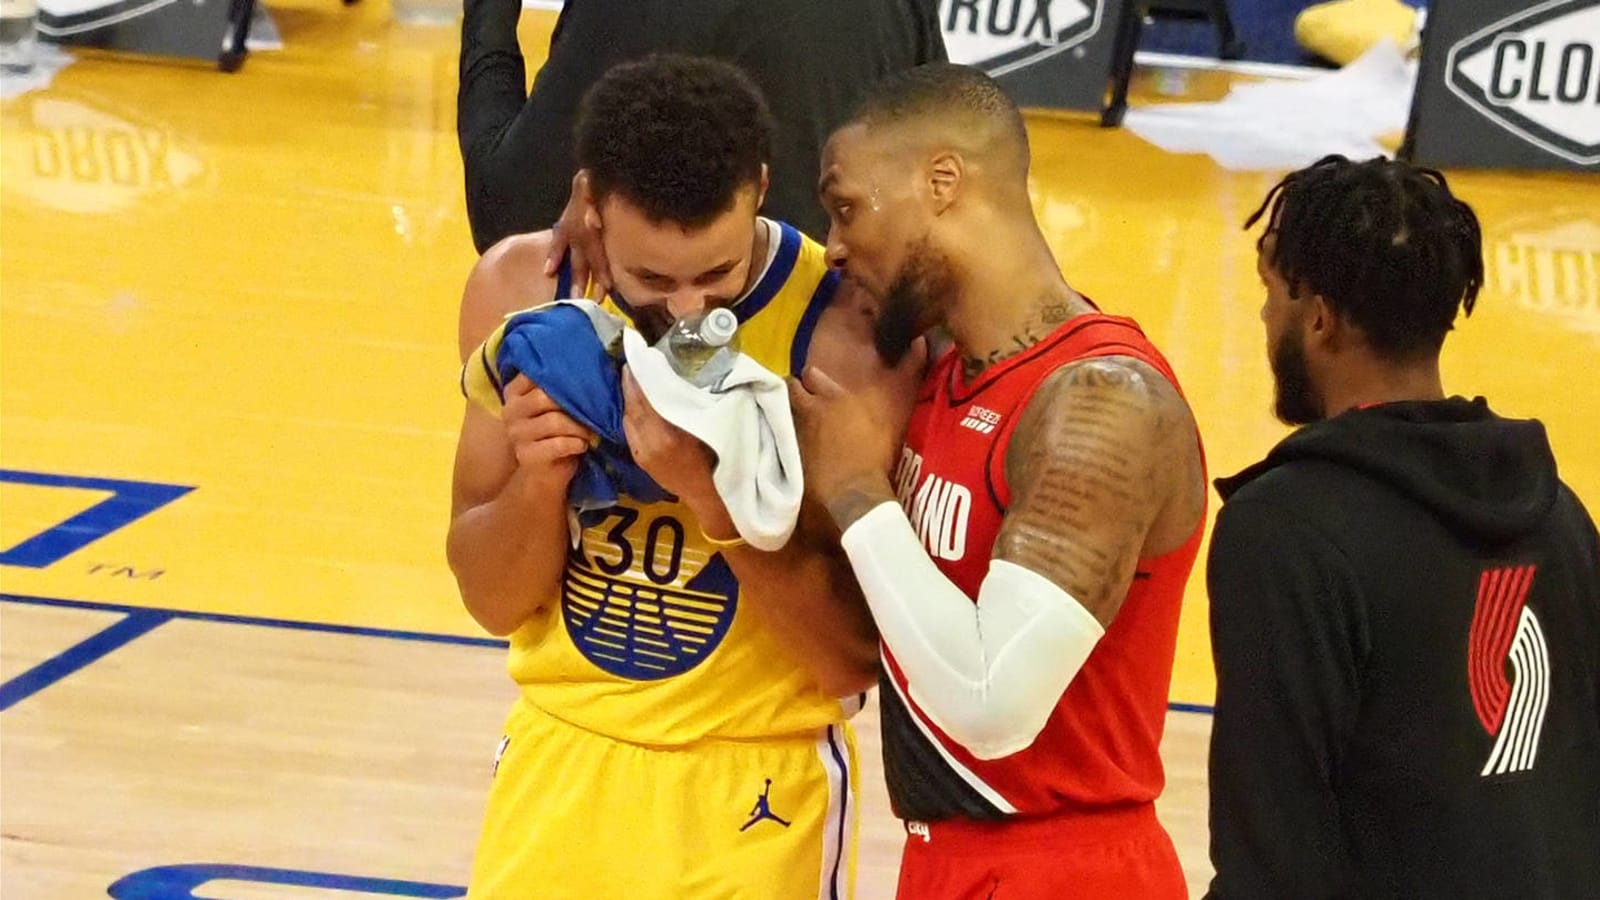 Lillard owns his trash talk after Steph Curry’s huge game